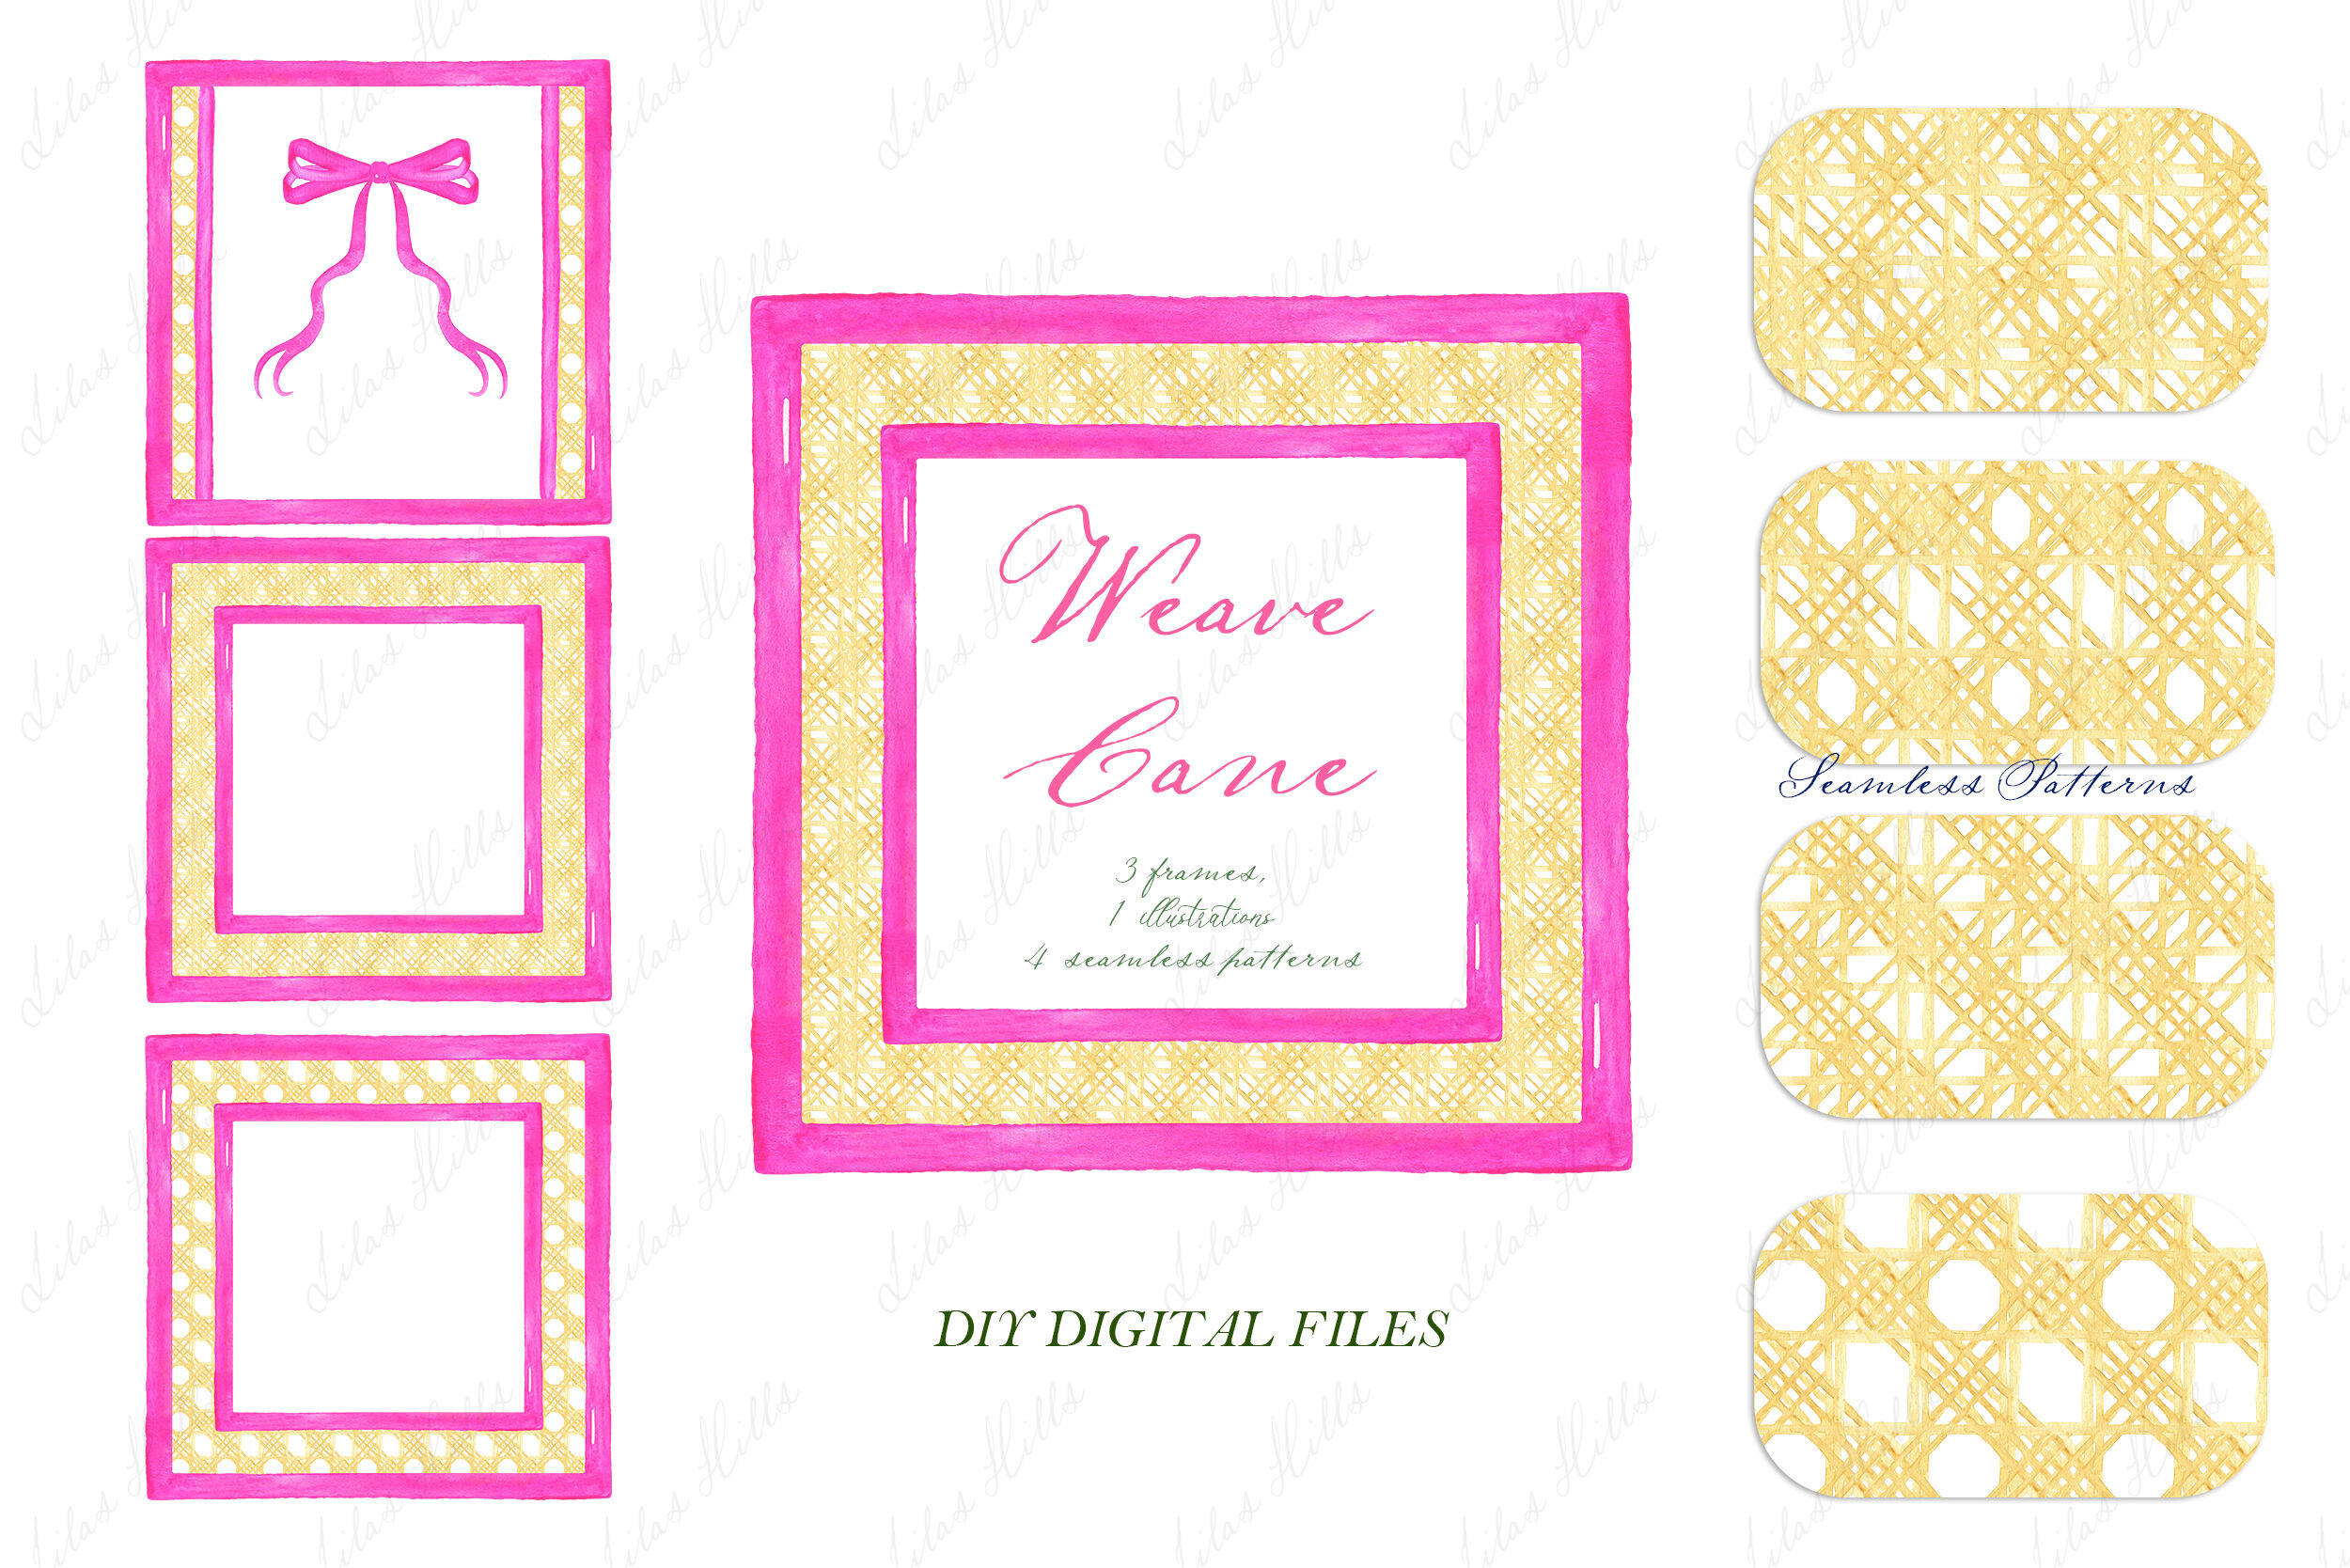 Weave Cane Pattern Hot Pink Frame Bow DIY Digital paper Frames By  LABFcreations